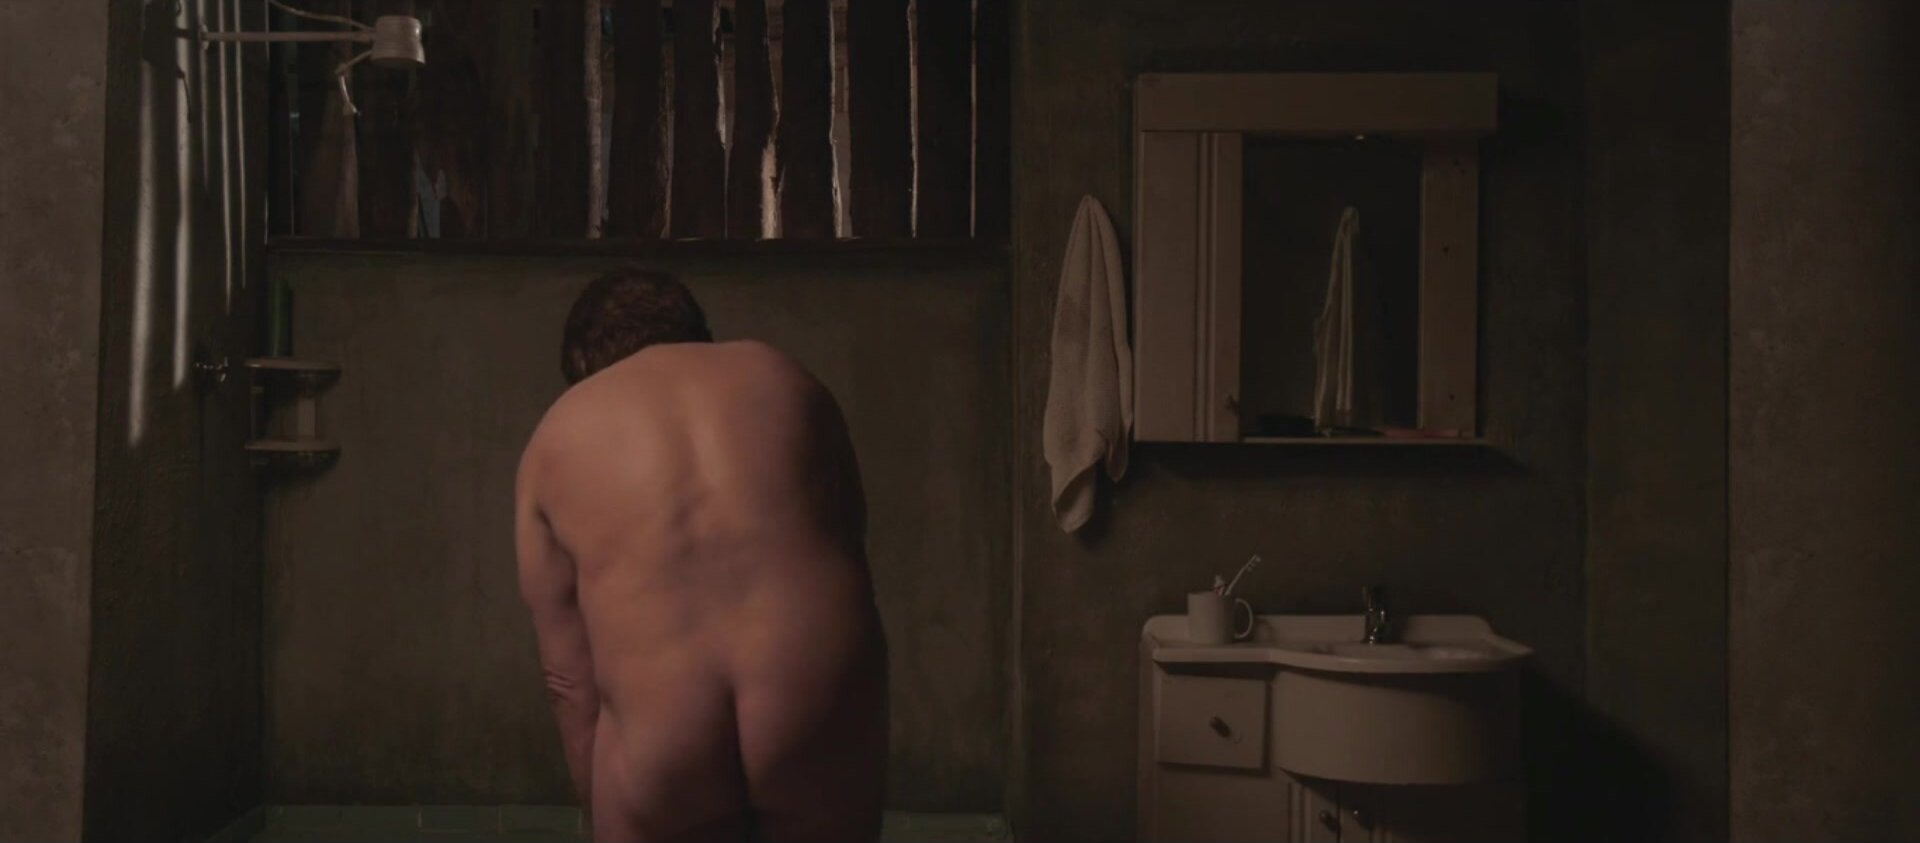 Actor Jackson Antunes shows his butt